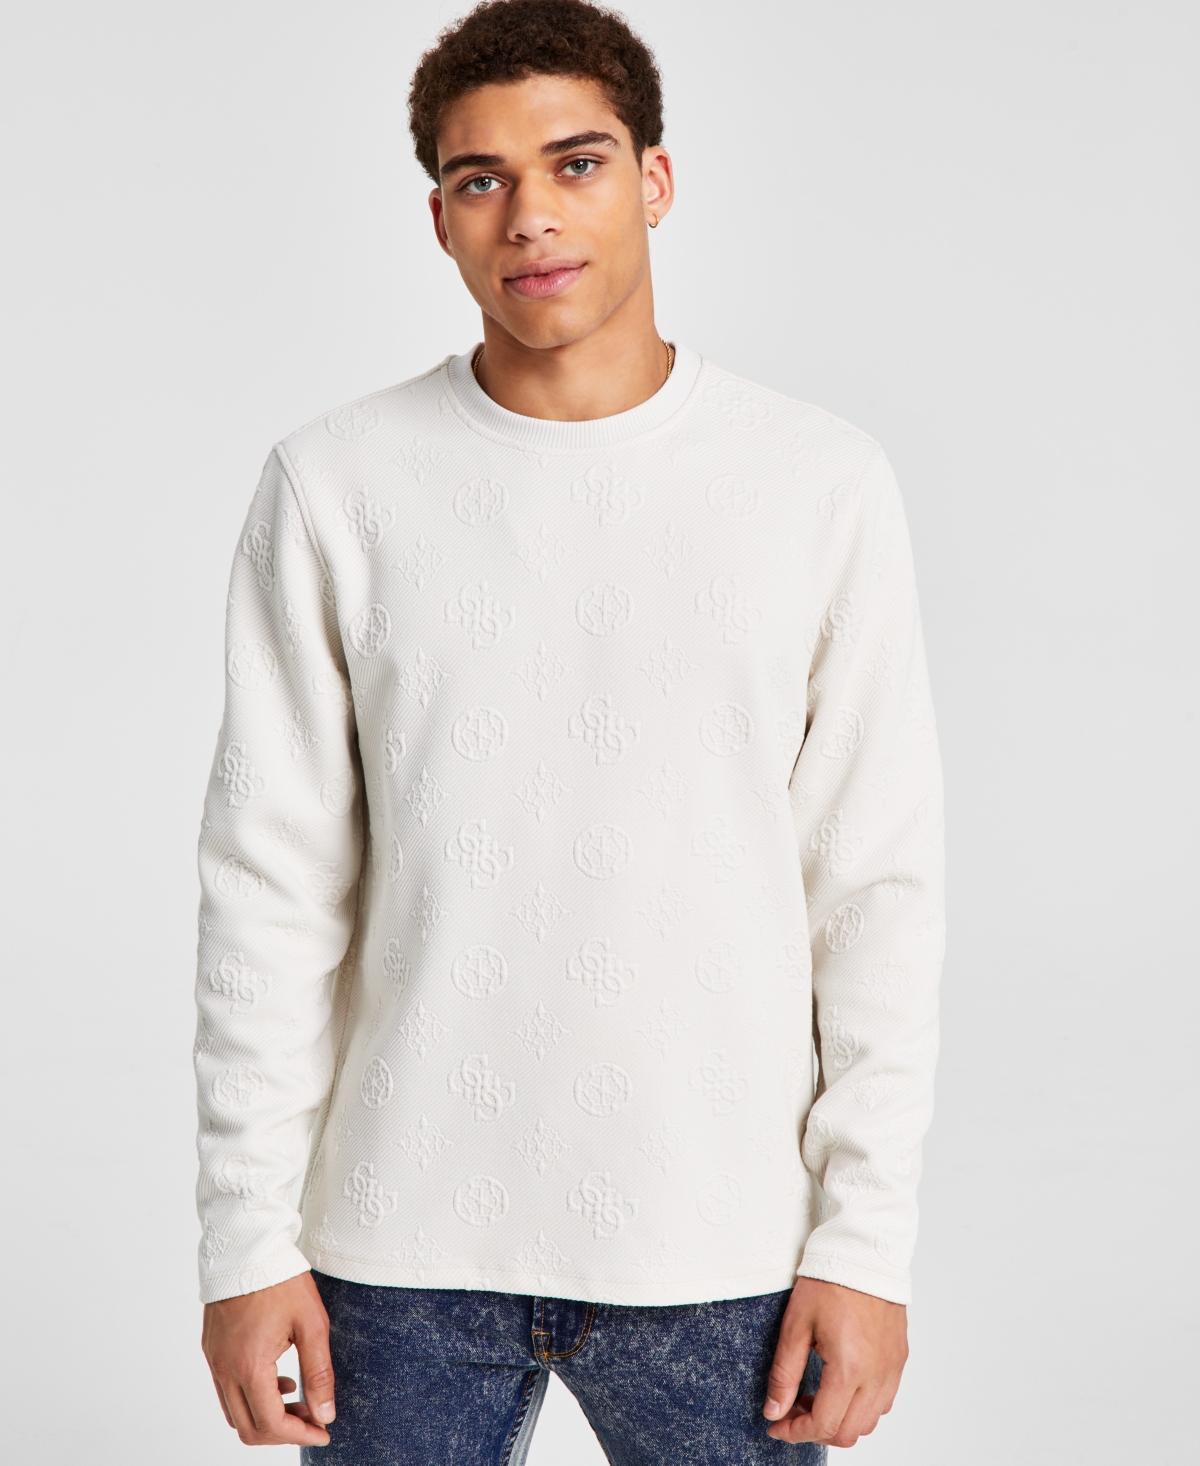 Guess Men's Pullover Long-sleeve Knit Crewneck Sweater Ivory |